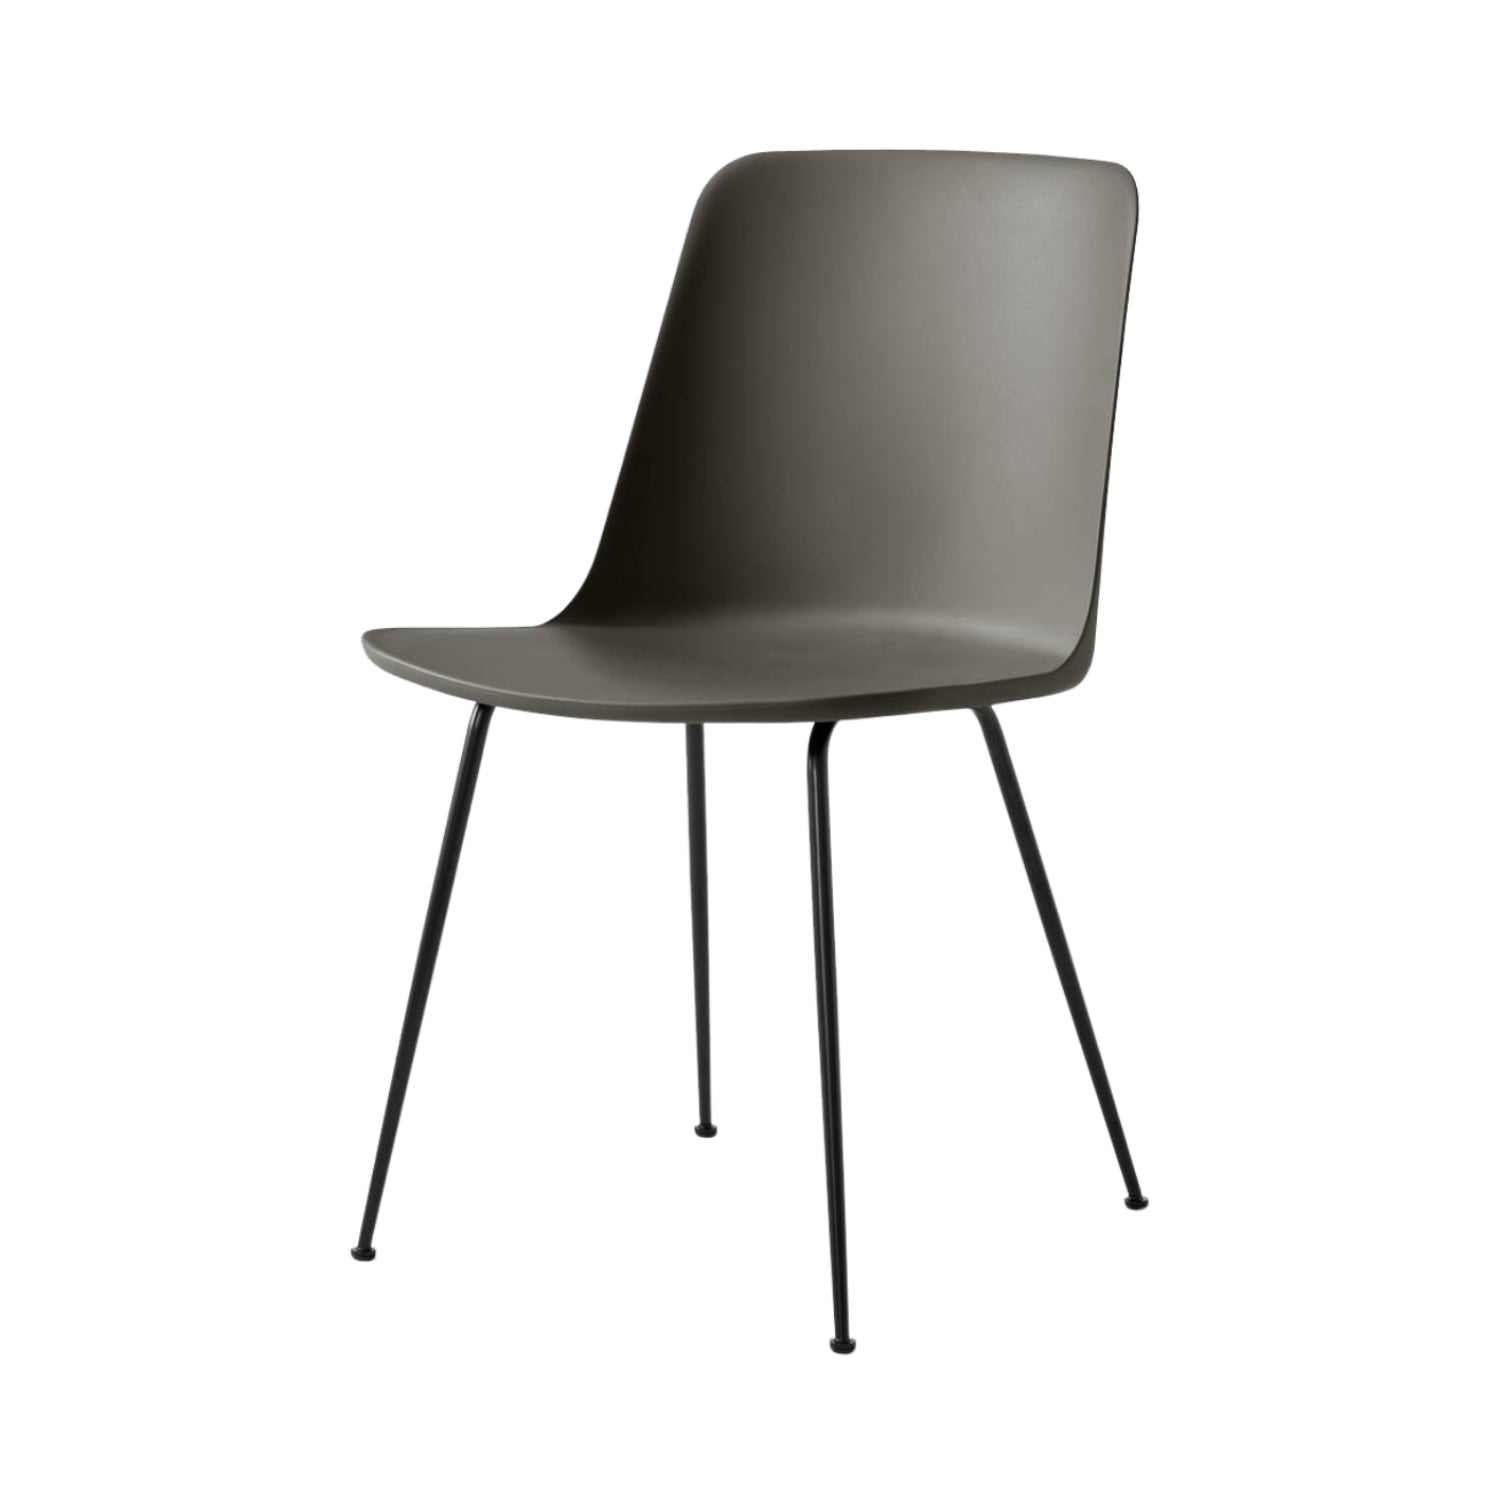 Rely Chair HW6: Stone Grey + Black